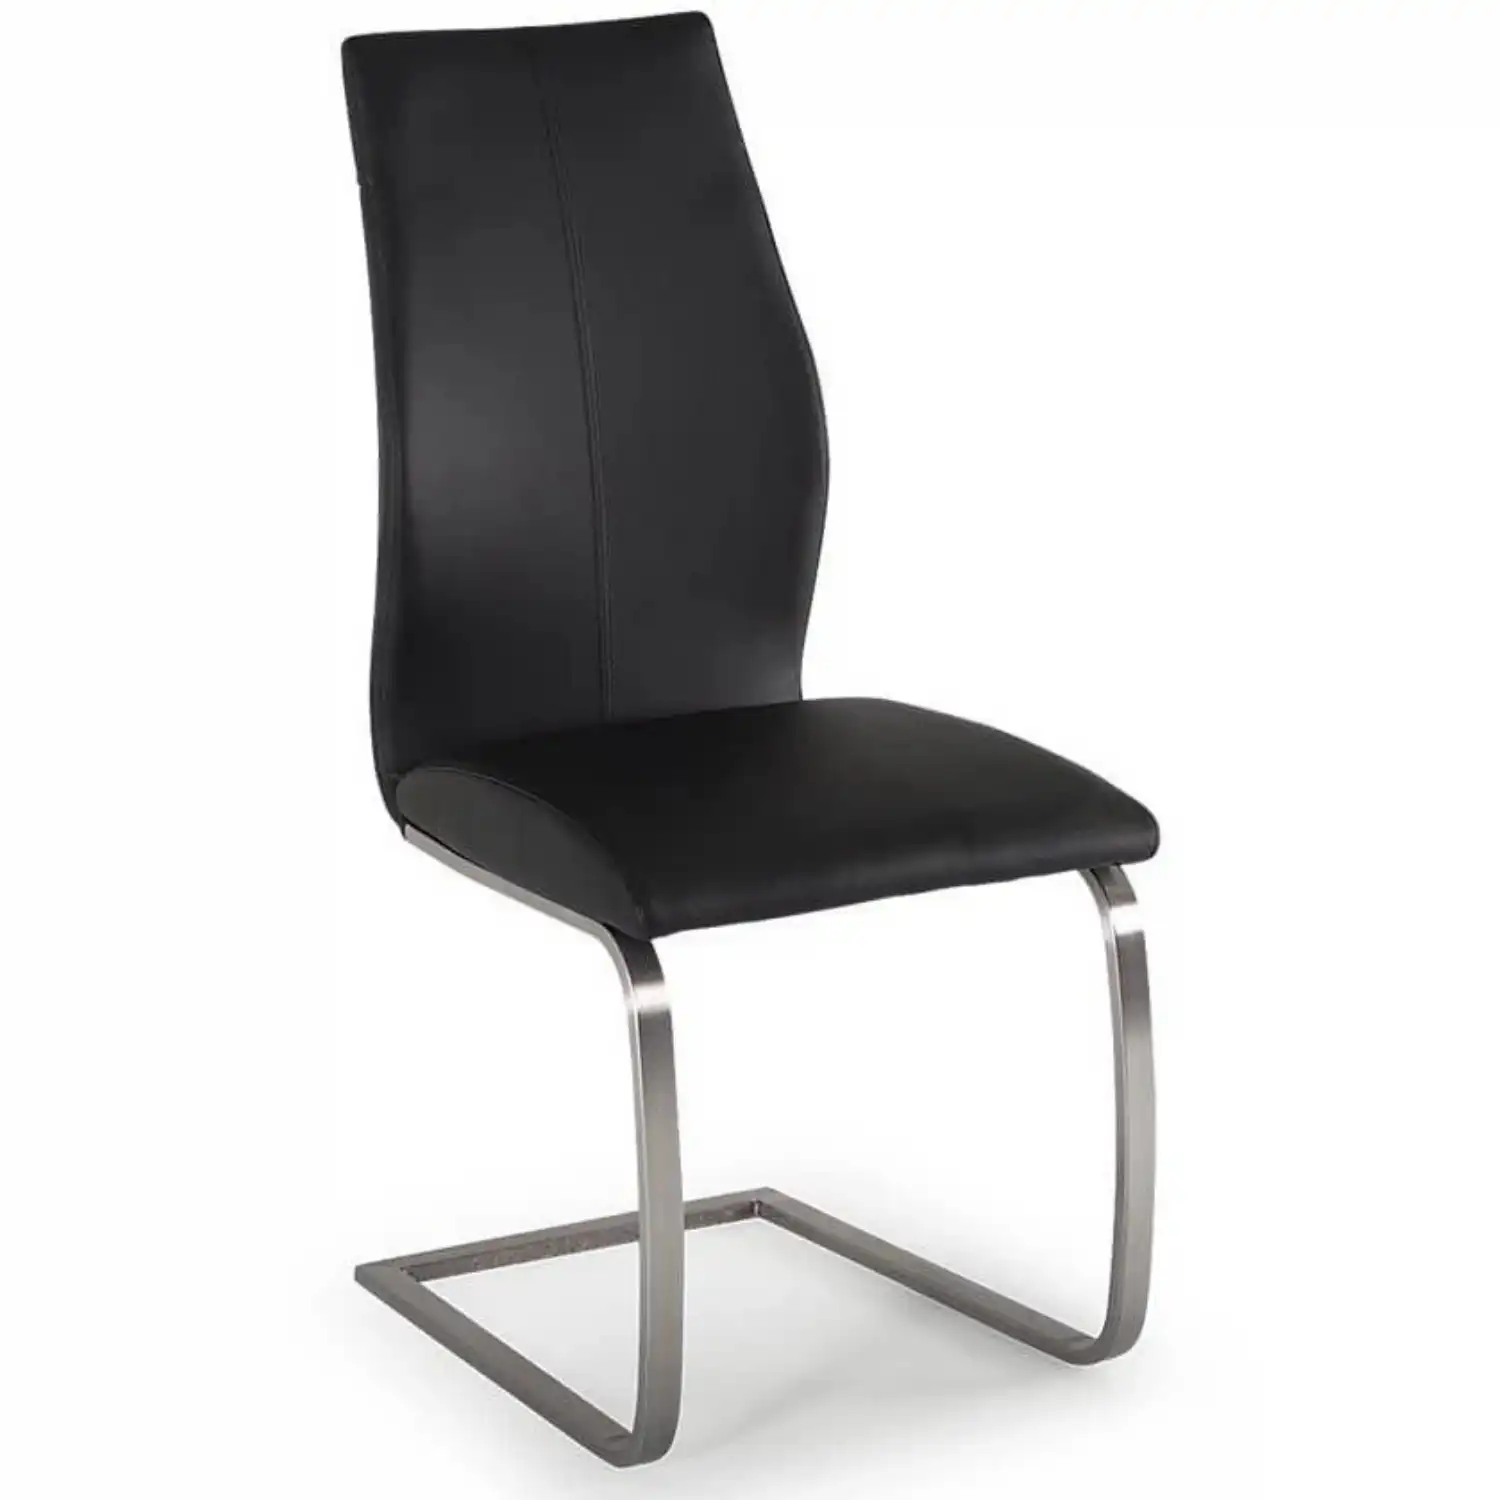 Black Leather Dining Chair Steel Legs